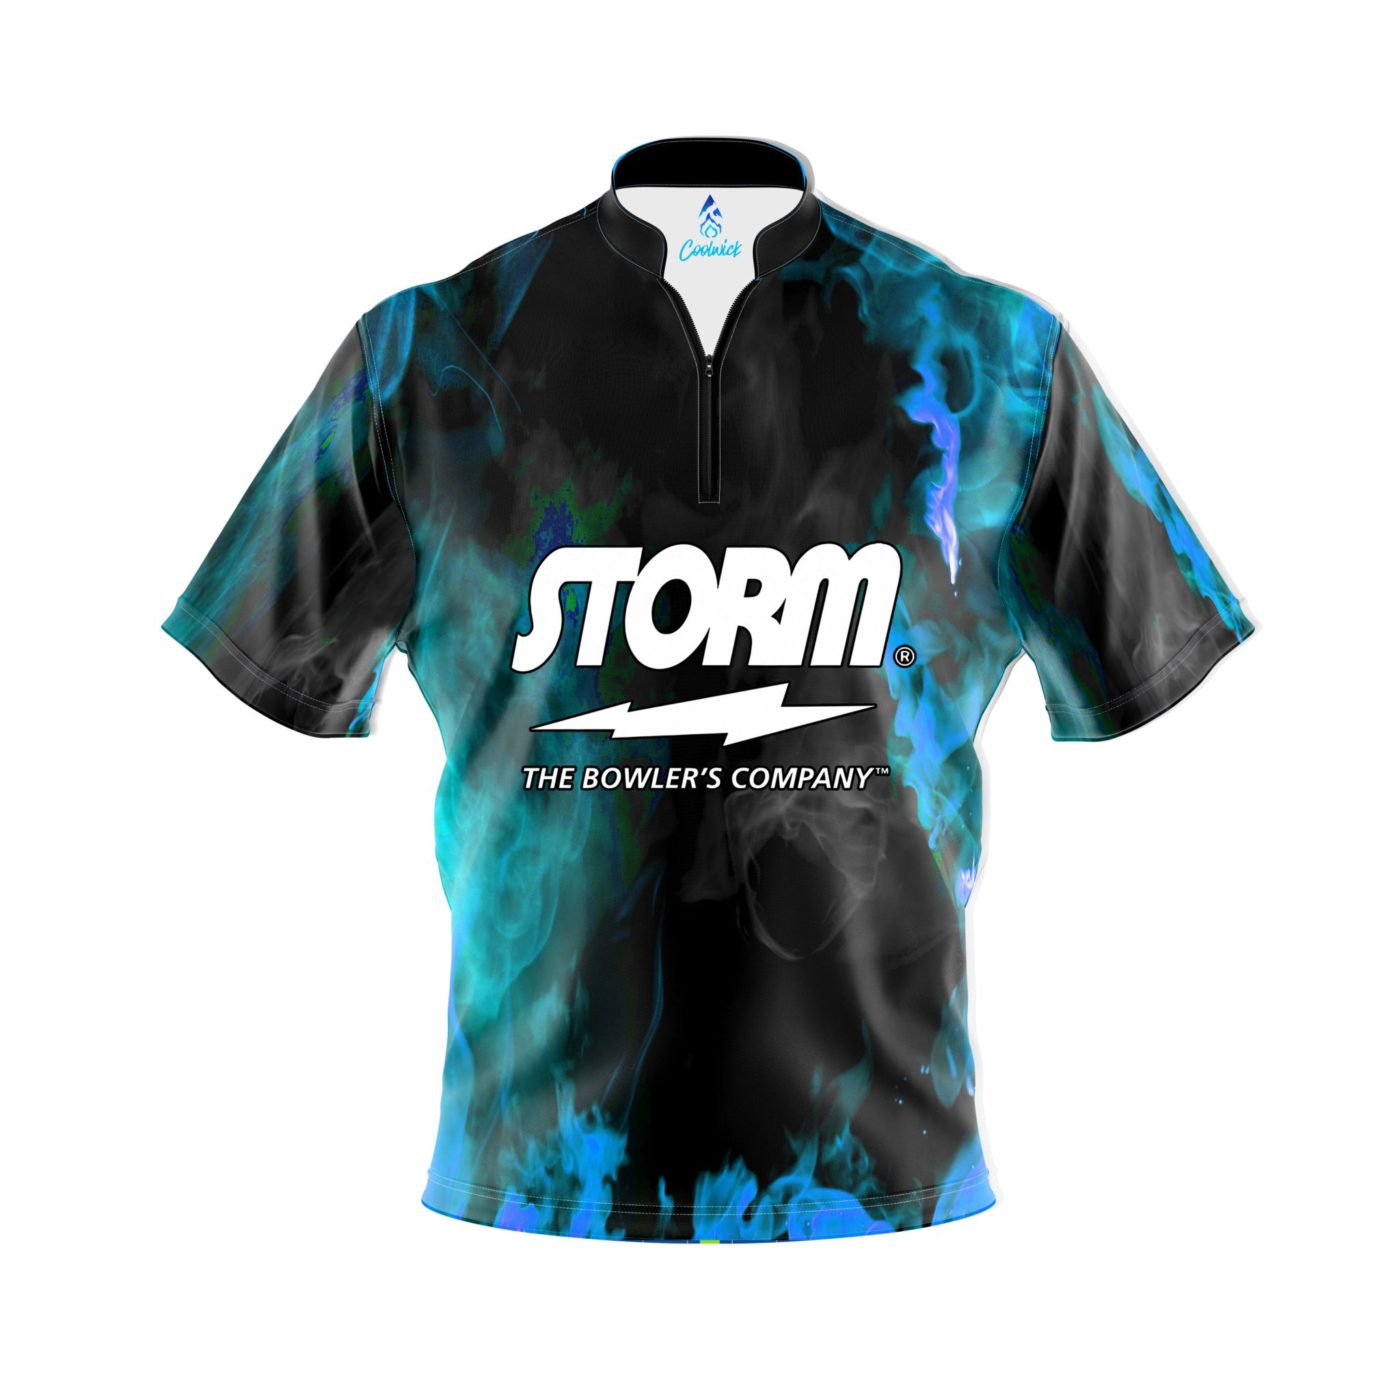 Are any of the Storm bowling shirts able to have a name put on the back?